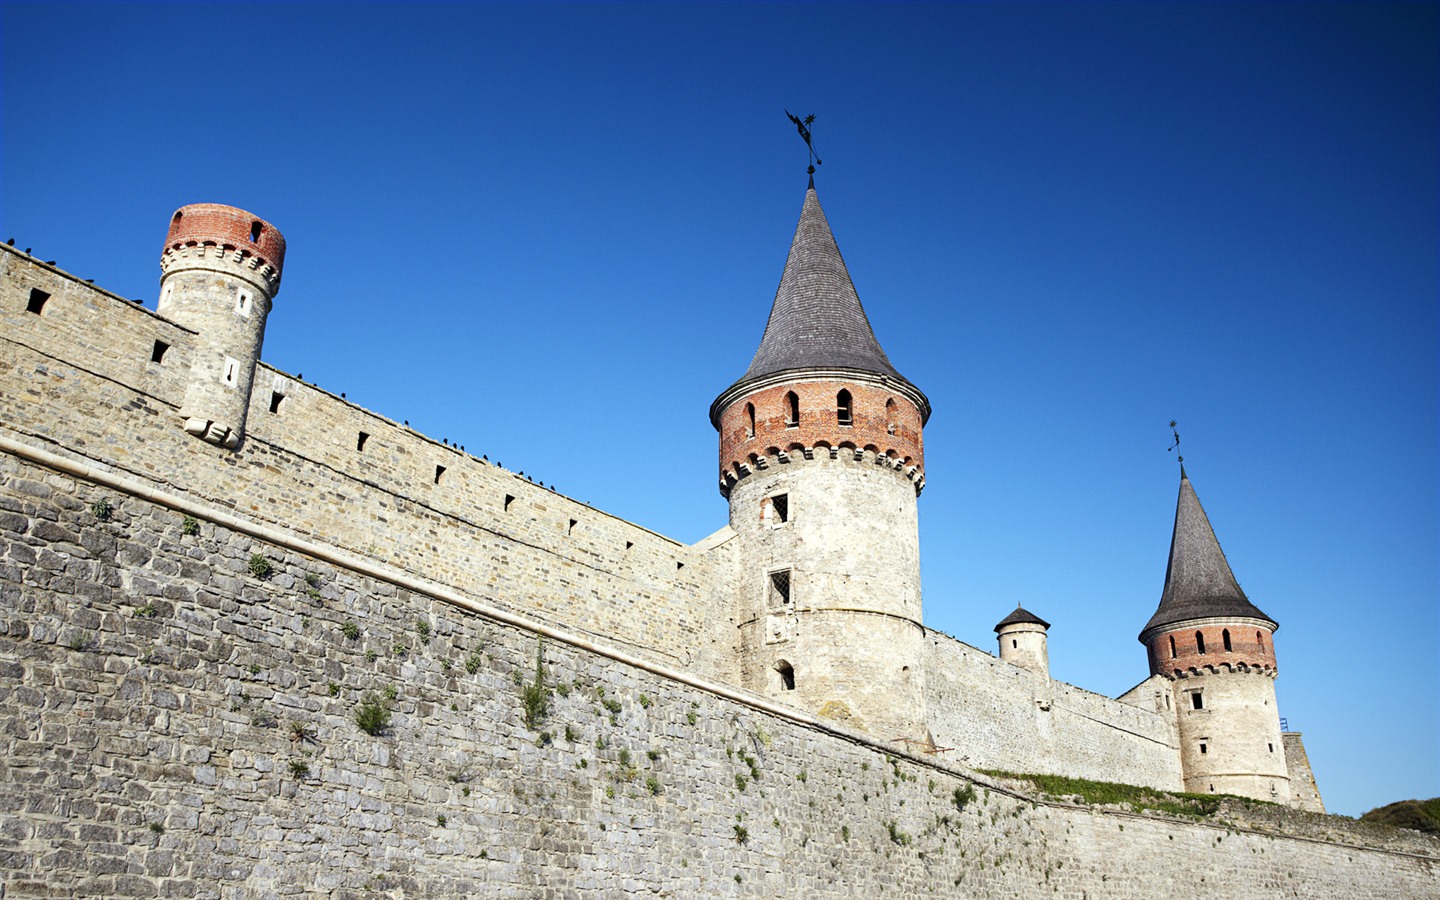 Windows 7 Wallpapers: Castles of Europe #21 - 1440x900